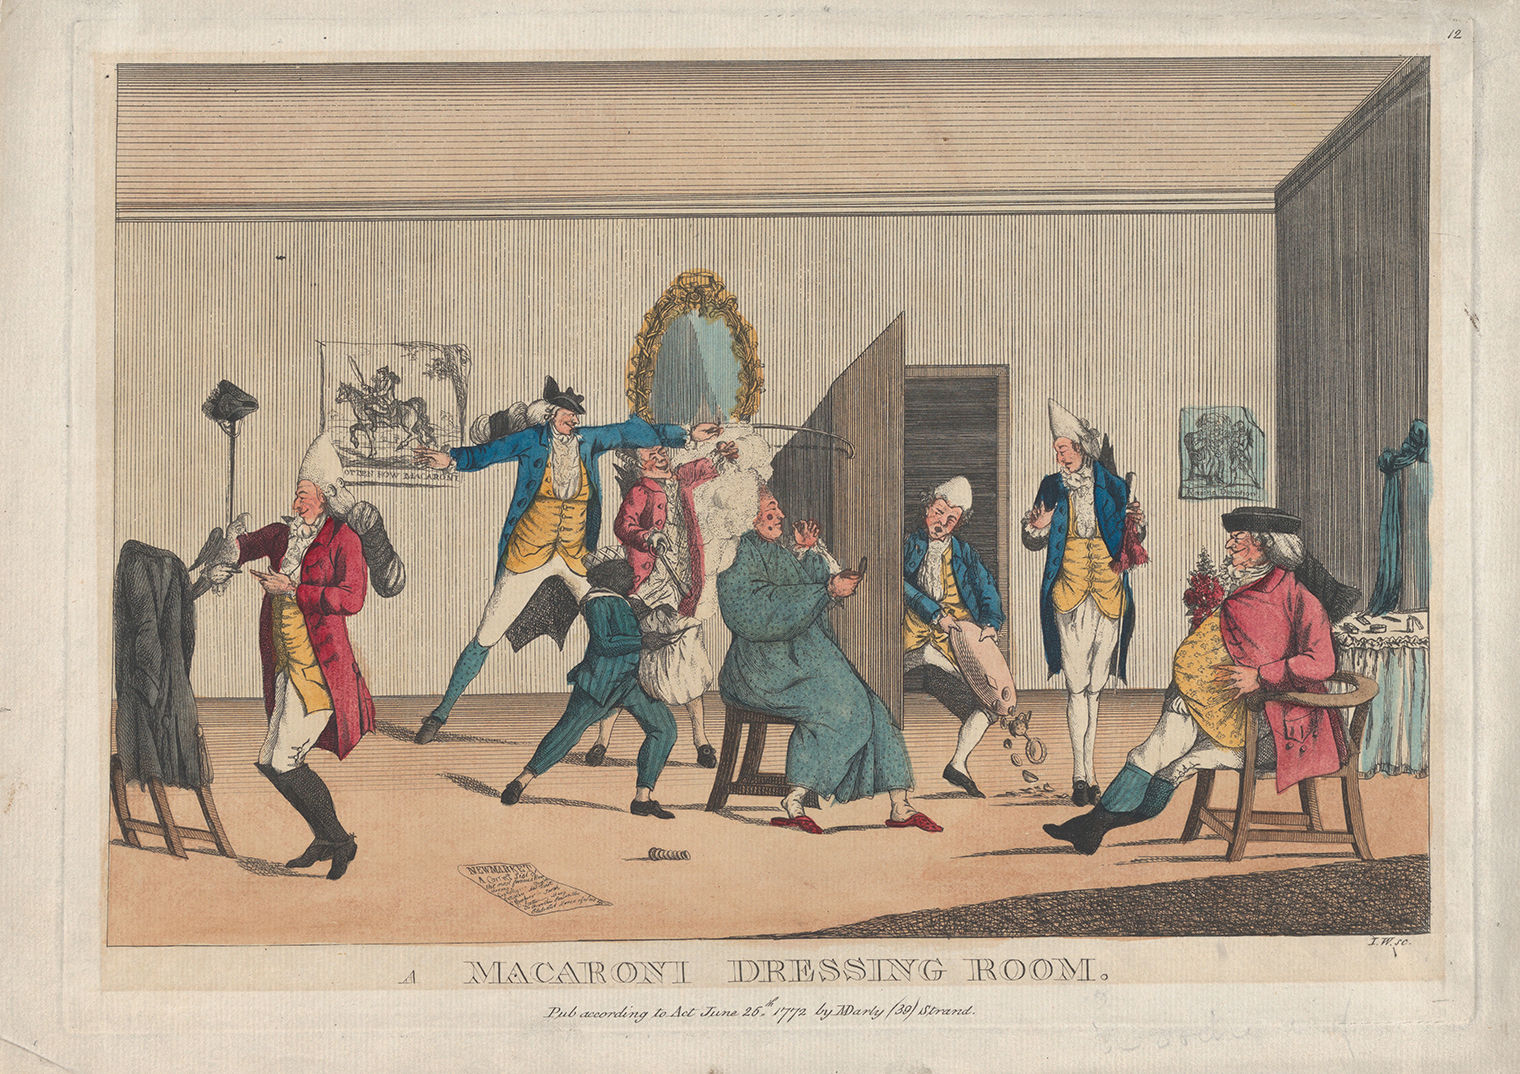 Hand colored etching of several men in a dressing room